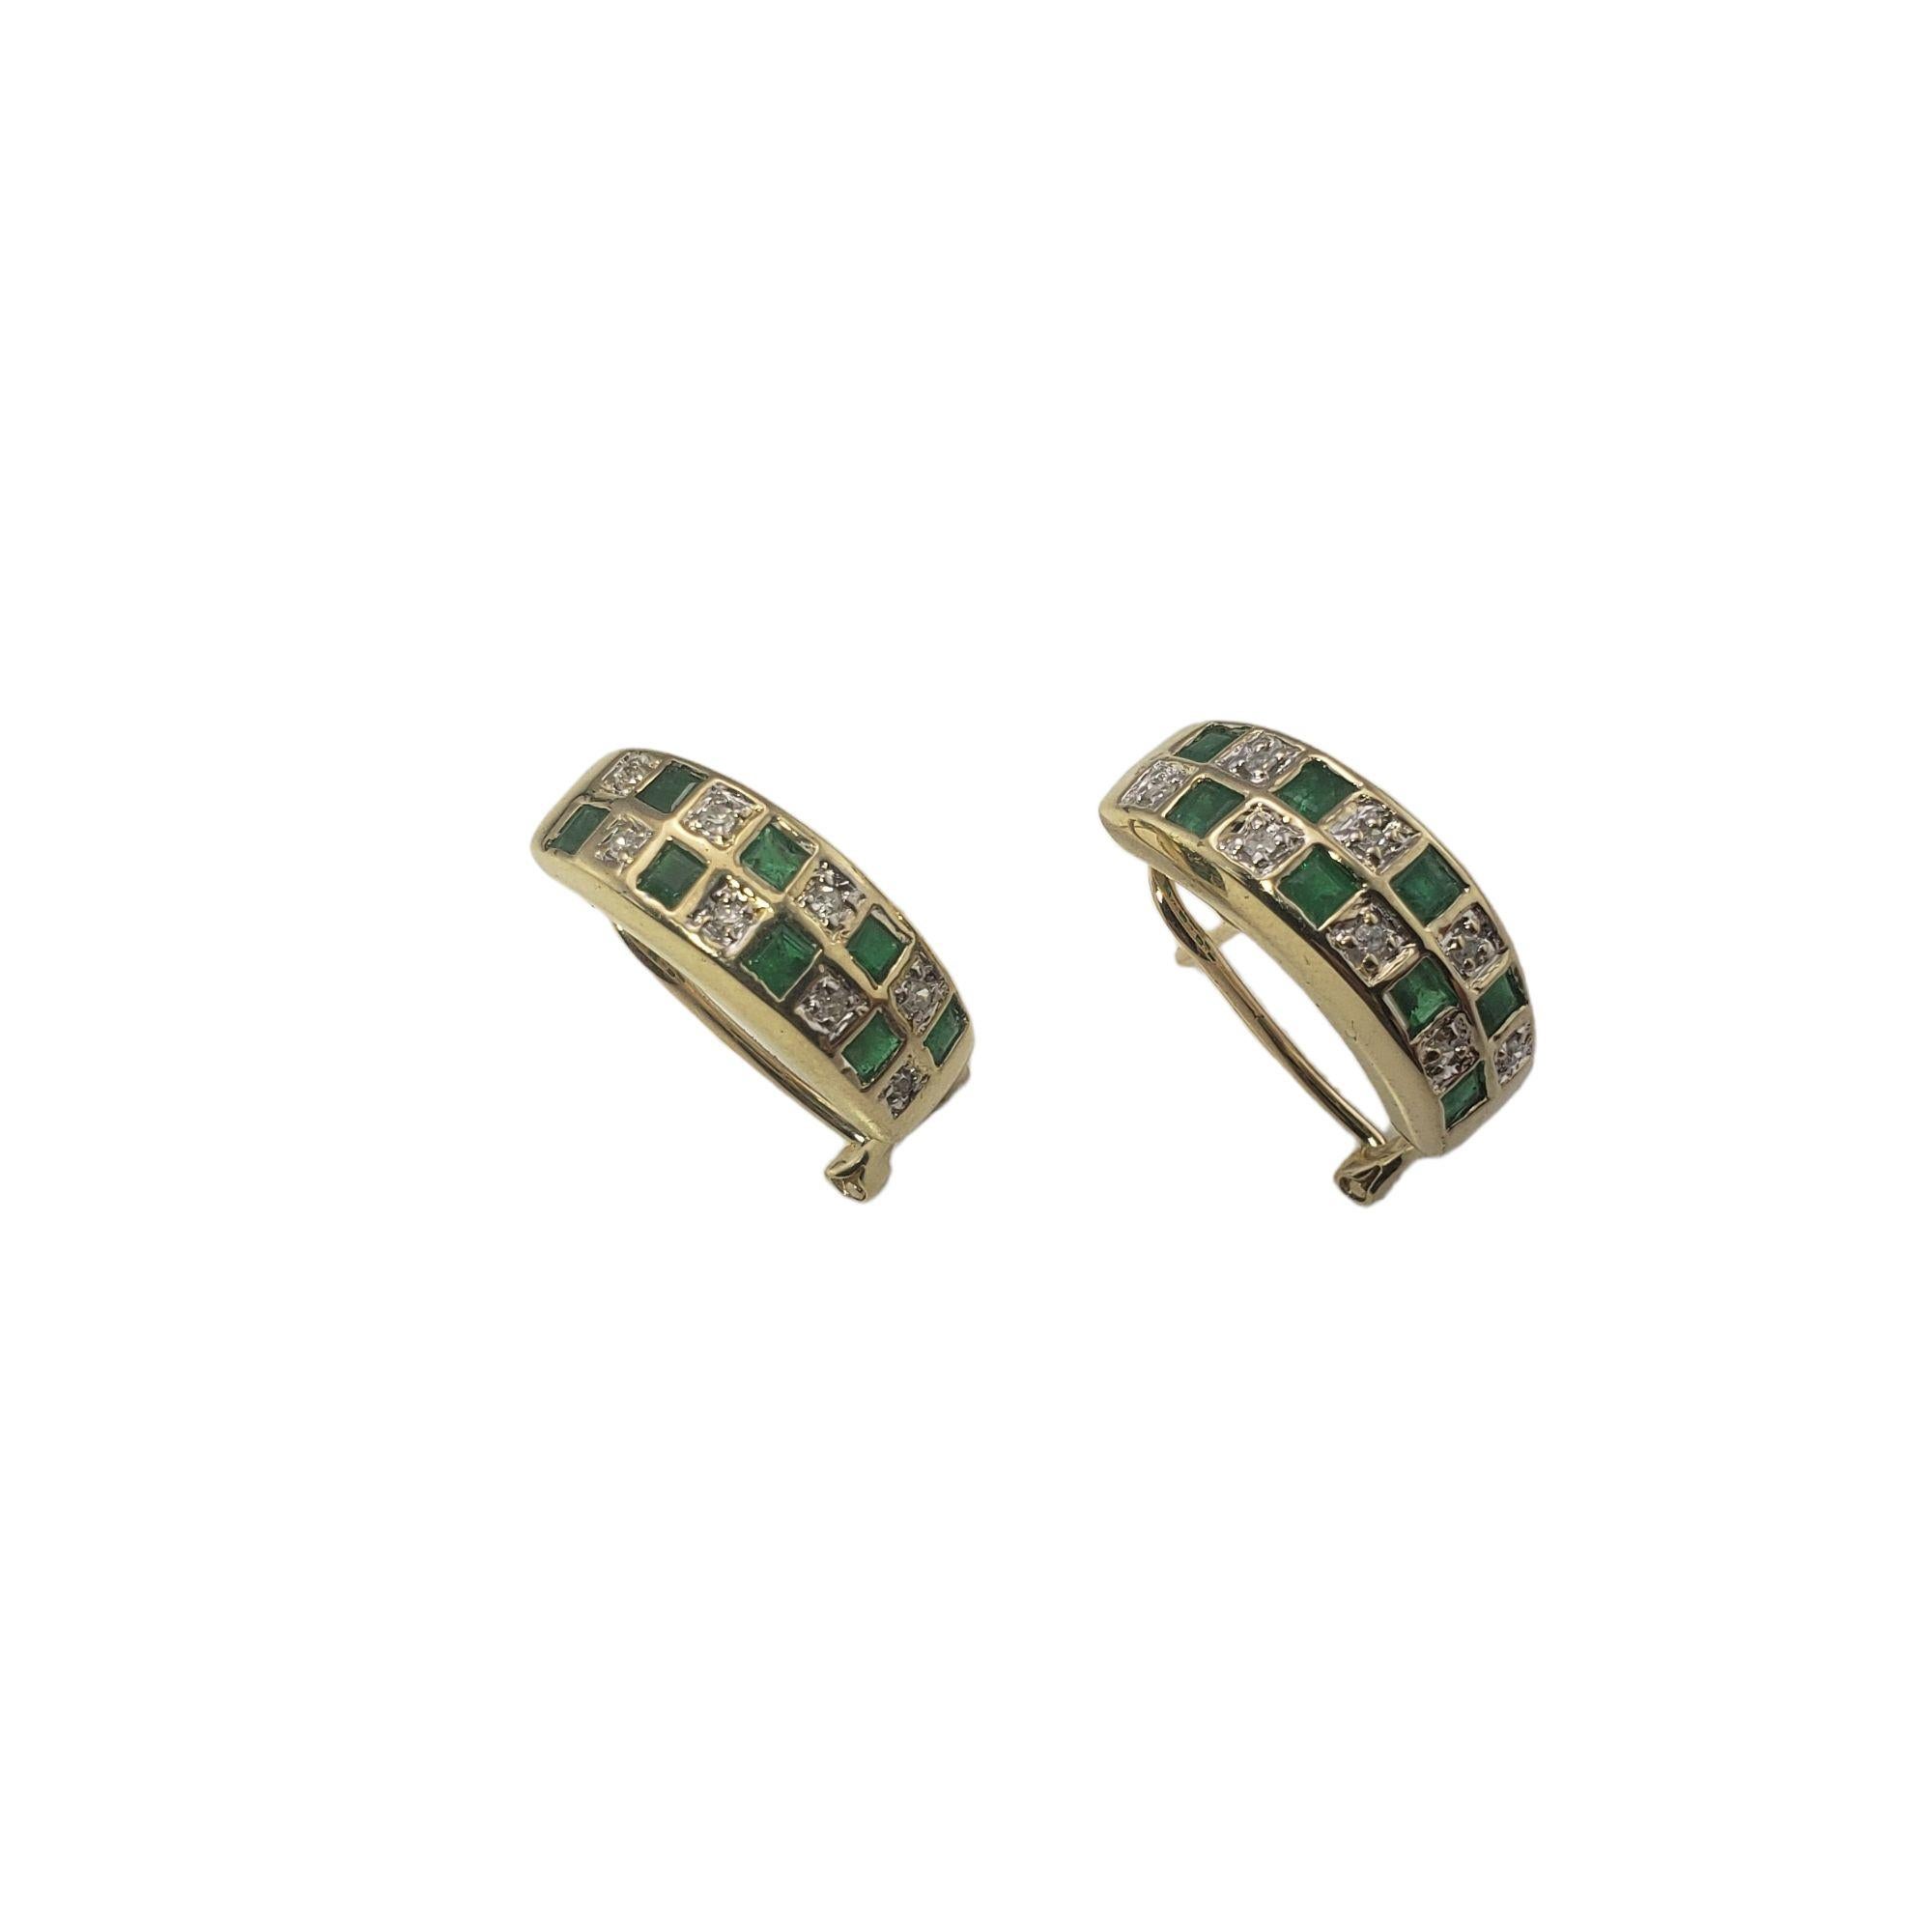 Vintage 14 Karat Yellow Gold Emerald and Diamond Earrings-

These sparkling earrings each feature 16 emeralds and 16 round brilliant cut diamonds set in classic 14K yellow gold. Omega back closures.

Matching Ring: RL-00013080

Approximate total